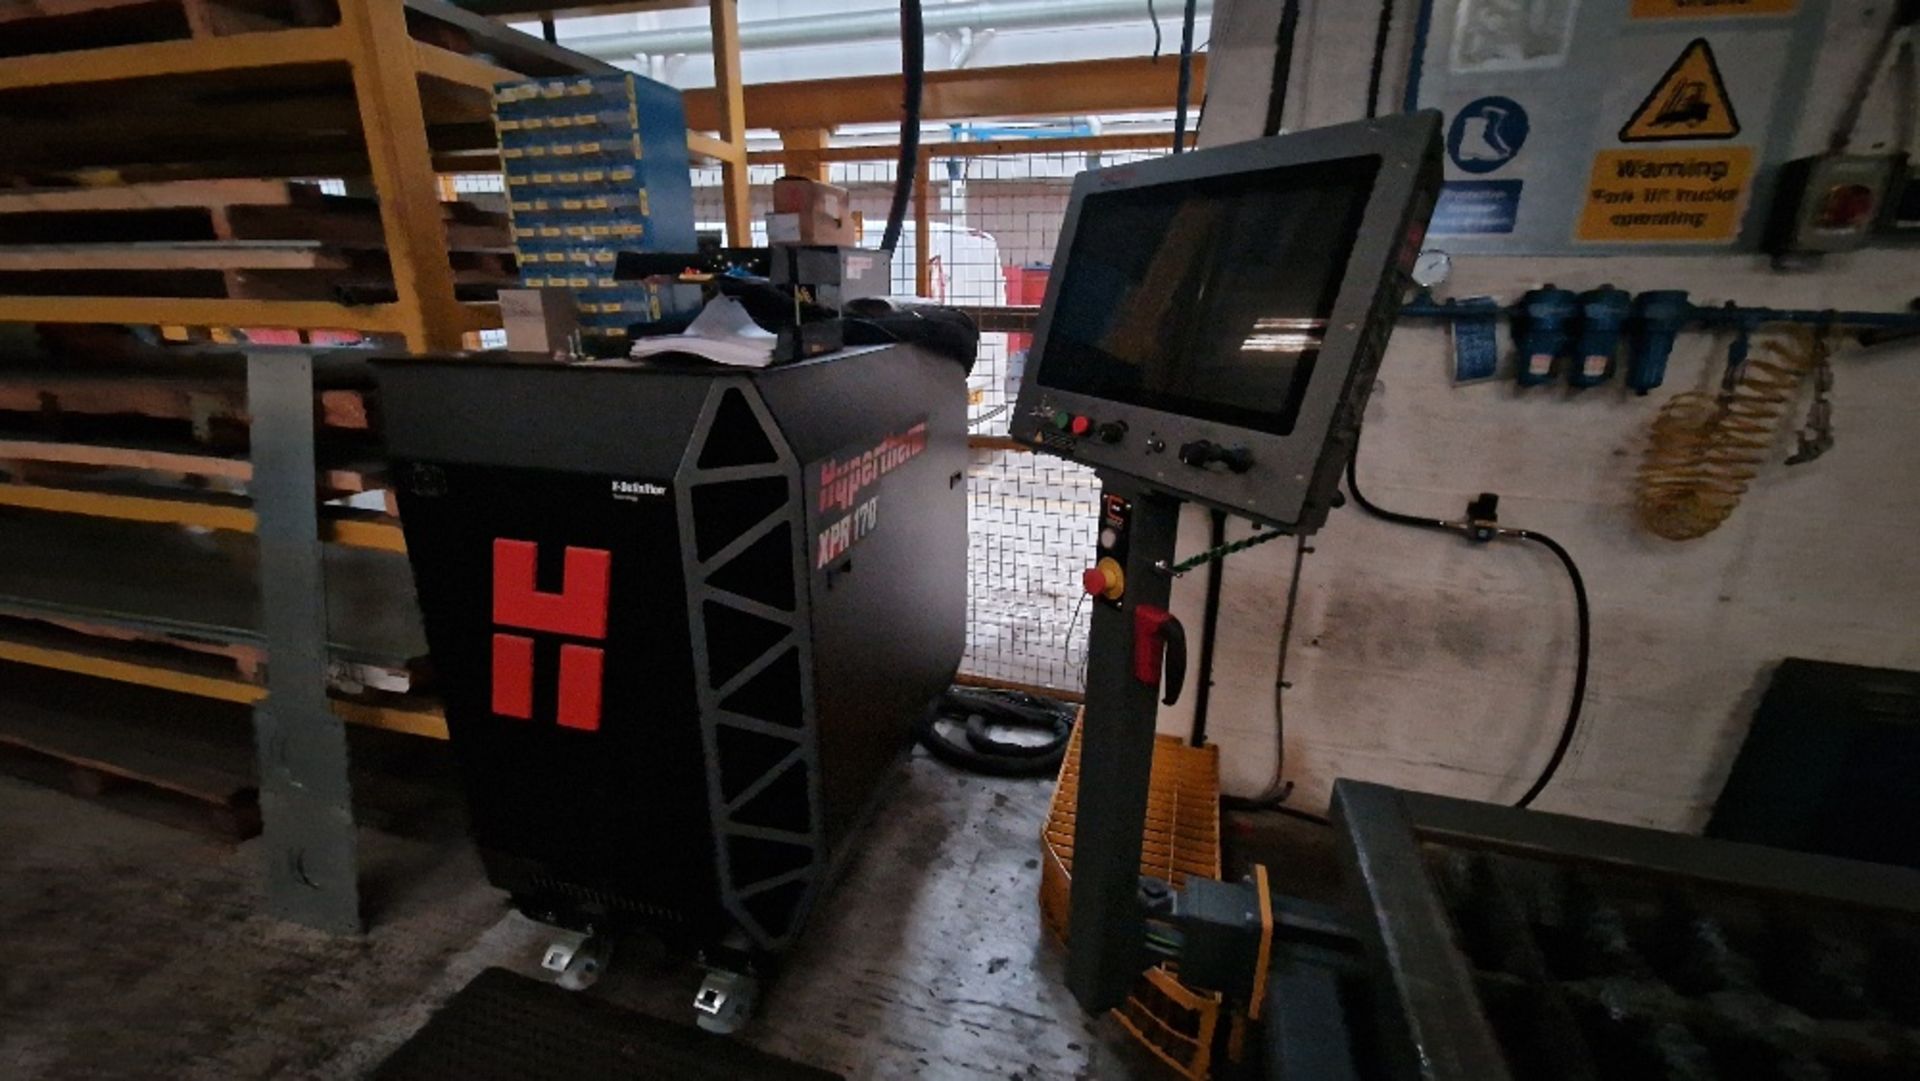 LASER PROFILE CUTTER TO INC: 1.ESPRIT AUTOMATION LIGHTENING HD 1500 PLASMA CUTTER. 2.HYPERTHERM - Image 9 of 9